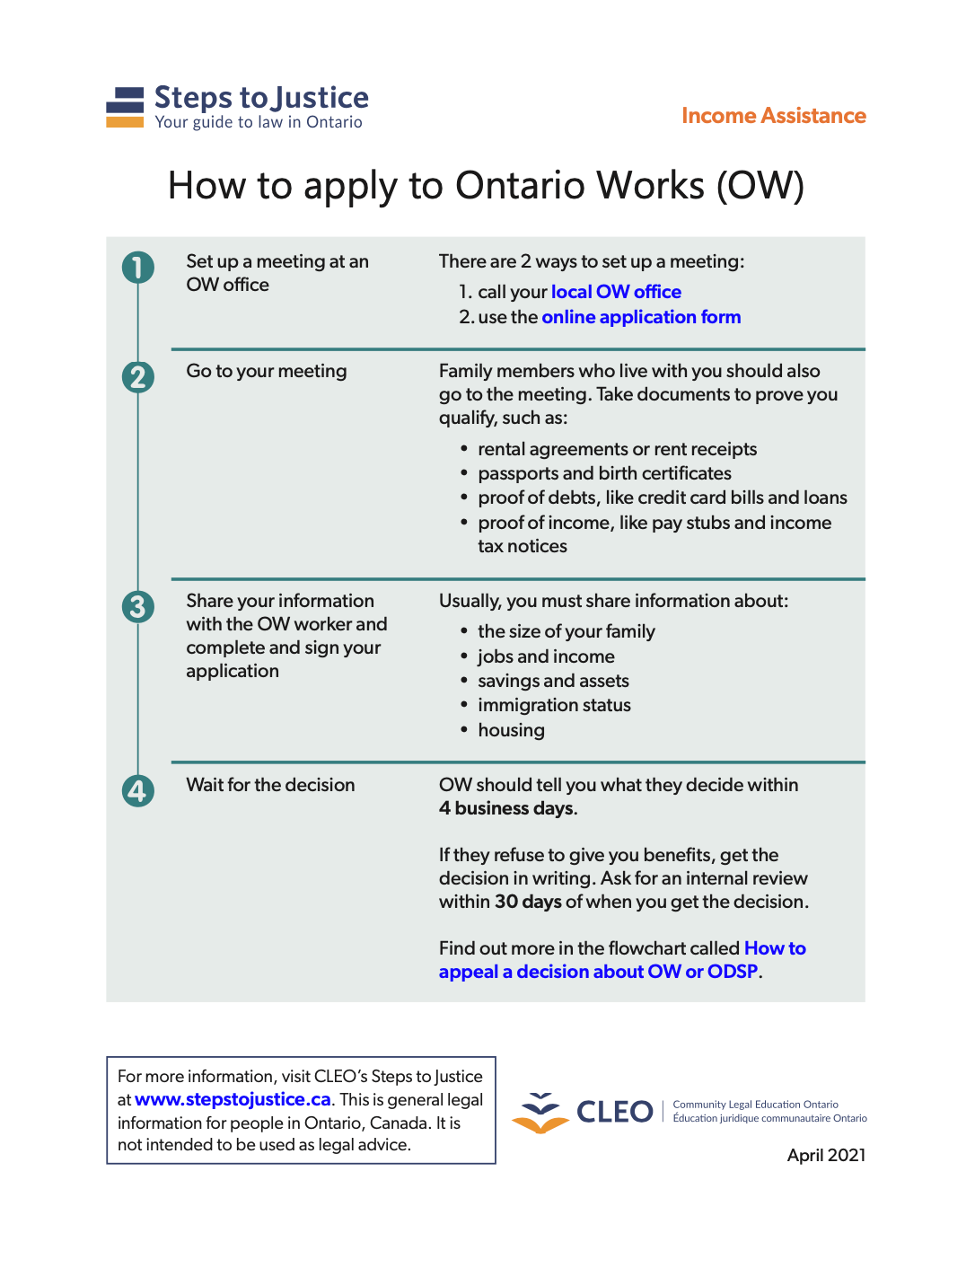 How to apply to Ontario Works (OW)